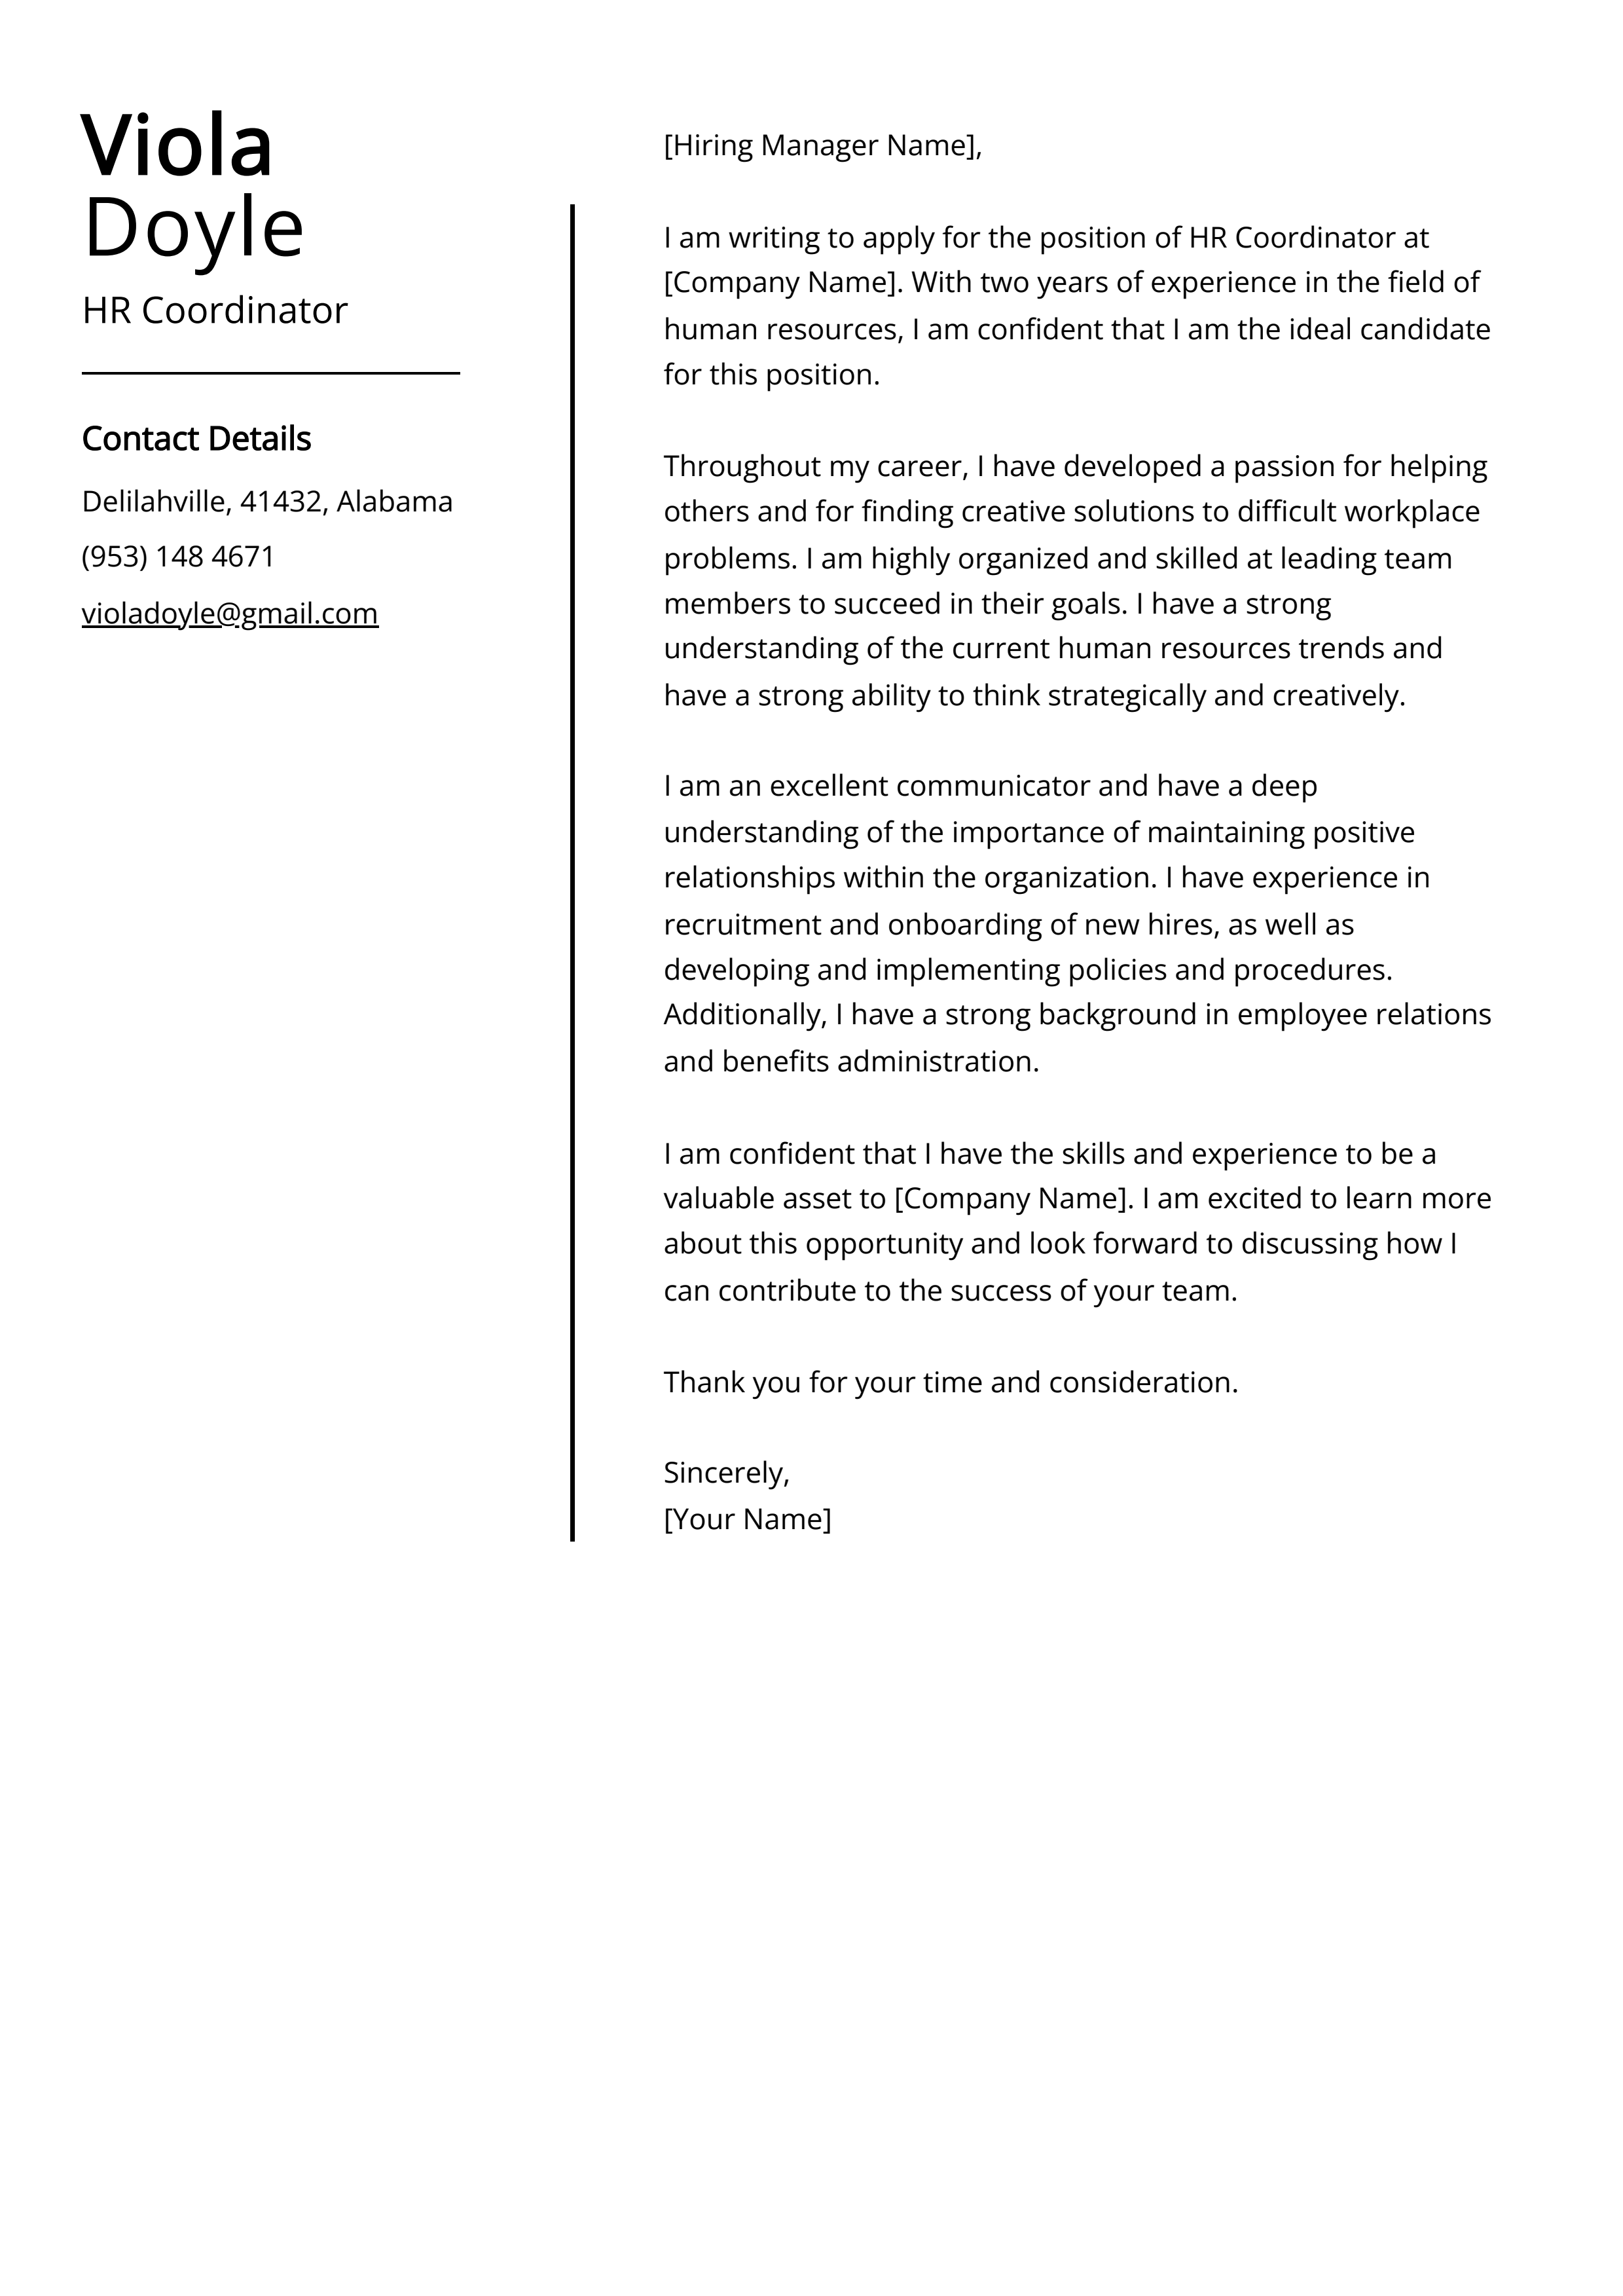 HR Coordinator Cover Letter Example